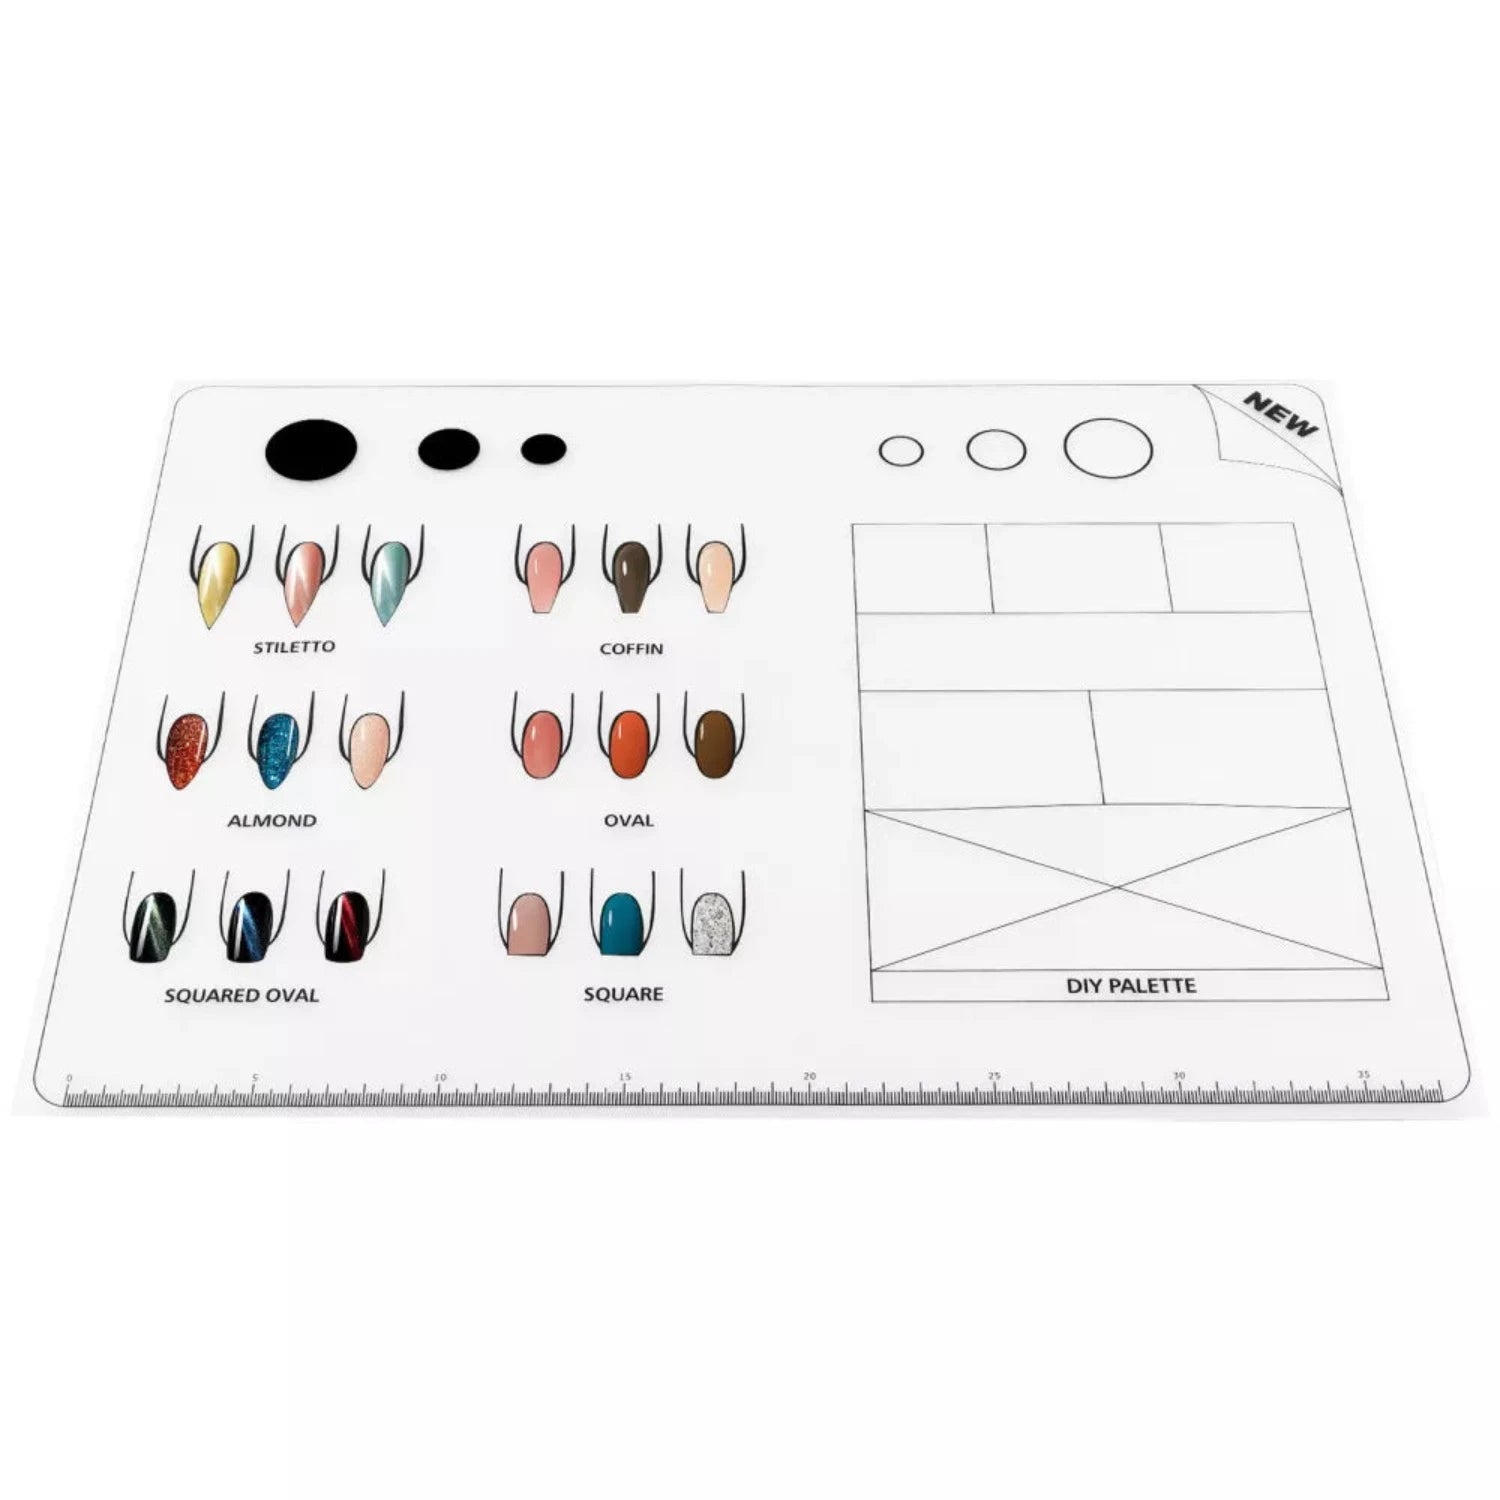 "Eco-friendly Reusable Silicone Nail Practice Mat with realistic nail templates for professional nail technicians and nail art enthusiasts"